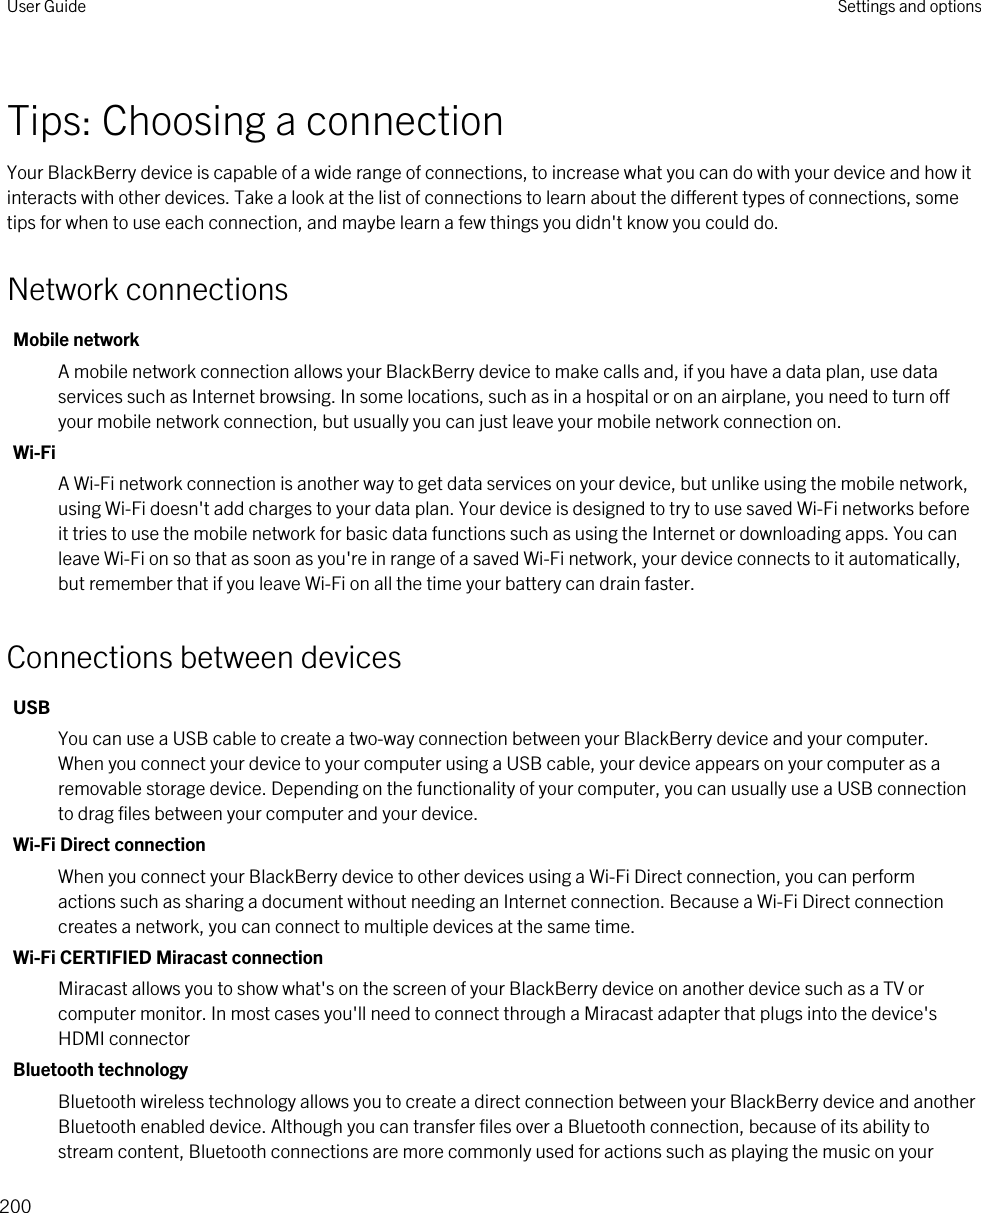 Tips: Choosing a connectionYour BlackBerry device is capable of a wide range of connections, to increase what you can do with your device and how it interacts with other devices. Take a look at the list of connections to learn about the different types of connections, some tips for when to use each connection, and maybe learn a few things you didn&apos;t know you could do.Network connectionsMobile networkA mobile network connection allows your BlackBerry device to make calls and, if you have a data plan, use data services such as Internet browsing. In some locations, such as in a hospital or on an airplane, you need to turn off your mobile network connection, but usually you can just leave your mobile network connection on.Wi-FiA Wi-Fi network connection is another way to get data services on your device, but unlike using the mobile network, using Wi-Fi doesn&apos;t add charges to your data plan. Your device is designed to try to use saved Wi-Fi networks before it tries to use the mobile network for basic data functions such as using the Internet or downloading apps. You can leave Wi-Fi on so that as soon as you&apos;re in range of a saved Wi-Fi network, your device connects to it automatically, but remember that if you leave Wi-Fi on all the time your battery can drain faster.Connections between devicesUSBYou can use a USB cable to create a two-way connection between your BlackBerry device and your computer. When you connect your device to your computer using a USB cable, your device appears on your computer as a removable storage device. Depending on the functionality of your computer, you can usually use a USB connection to drag files between your computer and your device.Wi-Fi Direct connectionWhen you connect your BlackBerry device to other devices using a Wi-Fi Direct connection, you can perform actions such as sharing a document without needing an Internet connection. Because a Wi-Fi Direct connection creates a network, you can connect to multiple devices at the same time.Wi-Fi CERTIFIED Miracast connectionMiracast allows you to show what&apos;s on the screen of your BlackBerry device on another device such as a TV or computer monitor. In most cases you&apos;ll need to connect through a Miracast adapter that plugs into the device&apos;s HDMI connectorBluetooth technologyBluetooth wireless technology allows you to create a direct connection between your BlackBerry device and another Bluetooth enabled device. Although you can transfer files over a Bluetooth connection, because of its ability to stream content, Bluetooth connections are more commonly used for actions such as playing the music on your User Guide Settings and options200